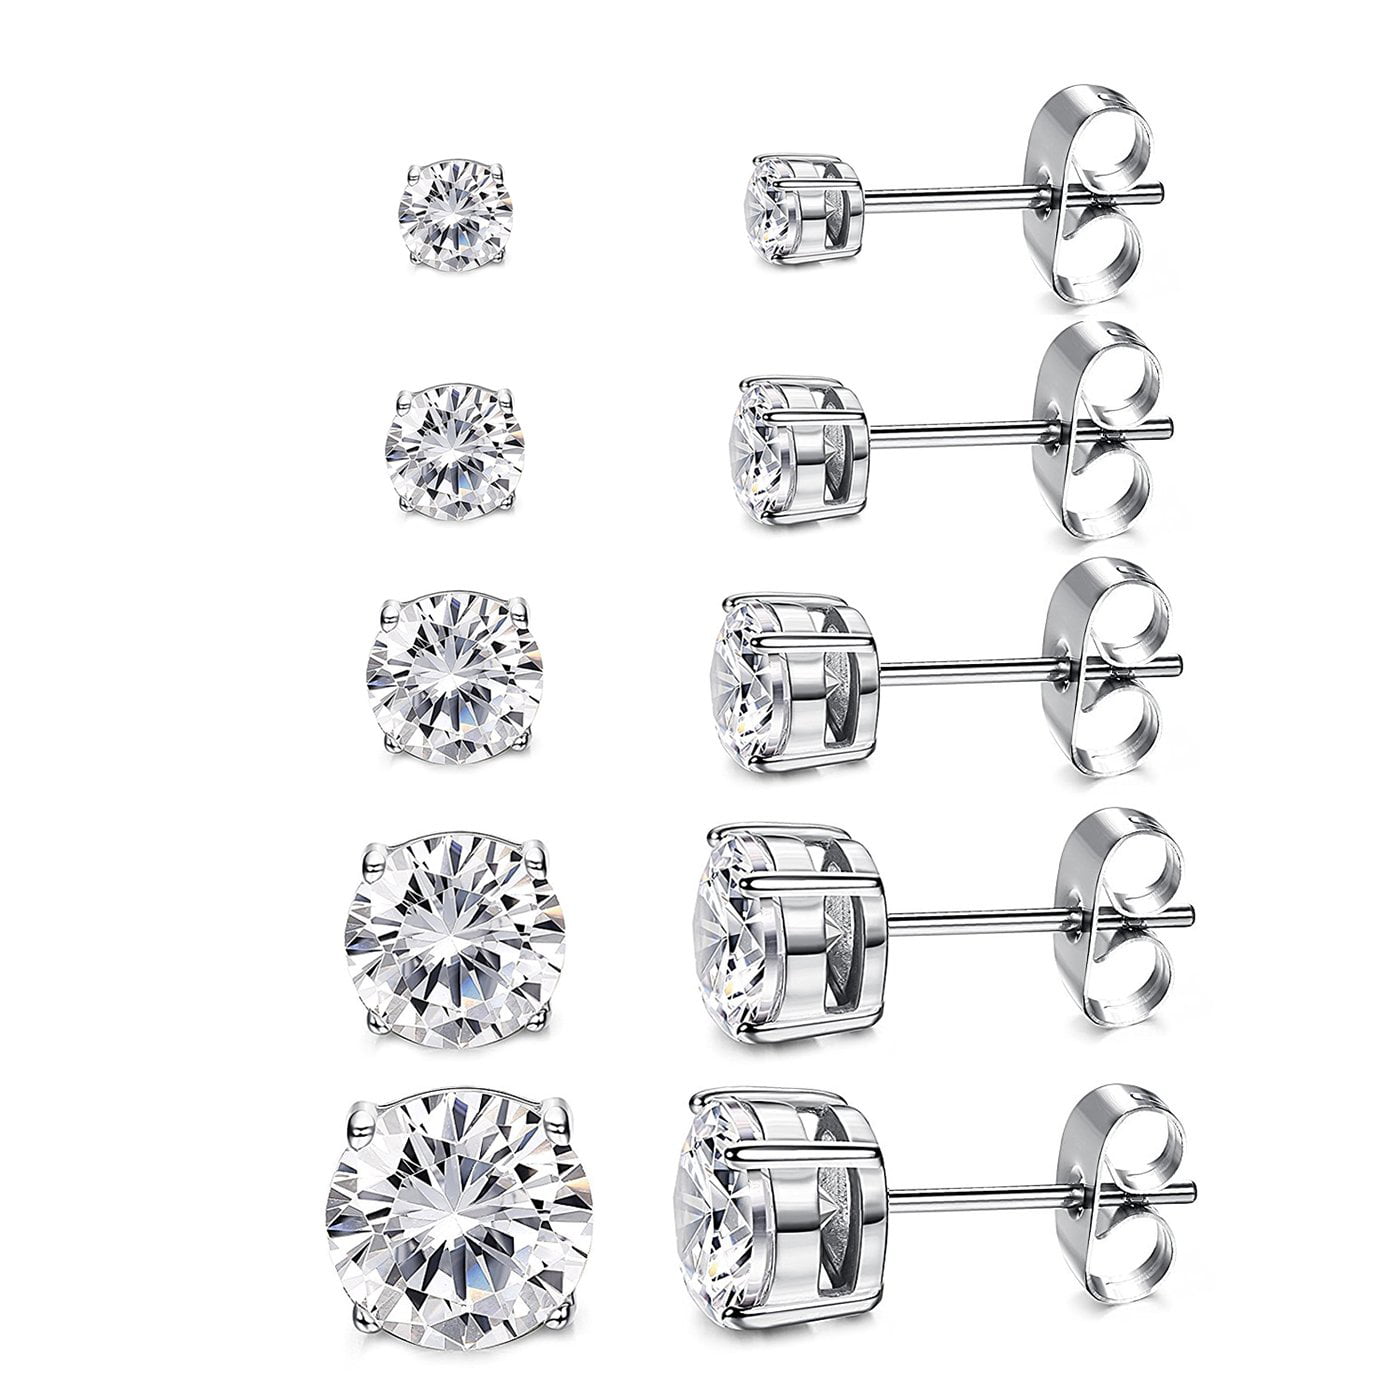 Womens 14K Gold Plated CZ Stud Earrings Simulated Diamond Round Cubic Zirconia Ear Stud Set（5 Pairs 